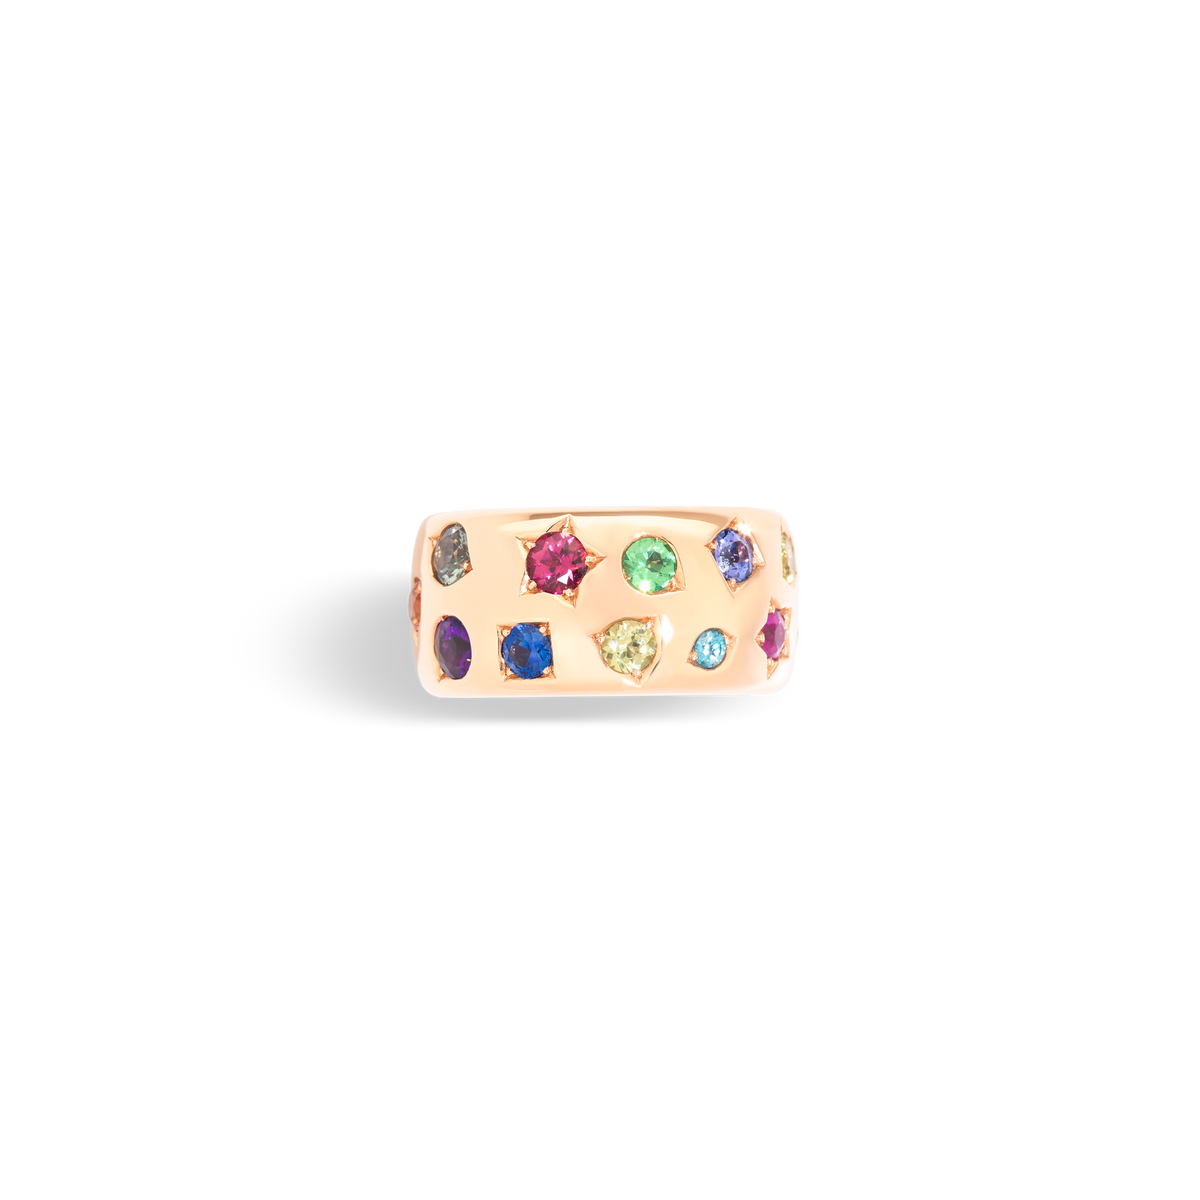 Pomellato Iconica Ring in 18k Rose Gold with Coloured Gemstones - Orsini Jewellers NZ